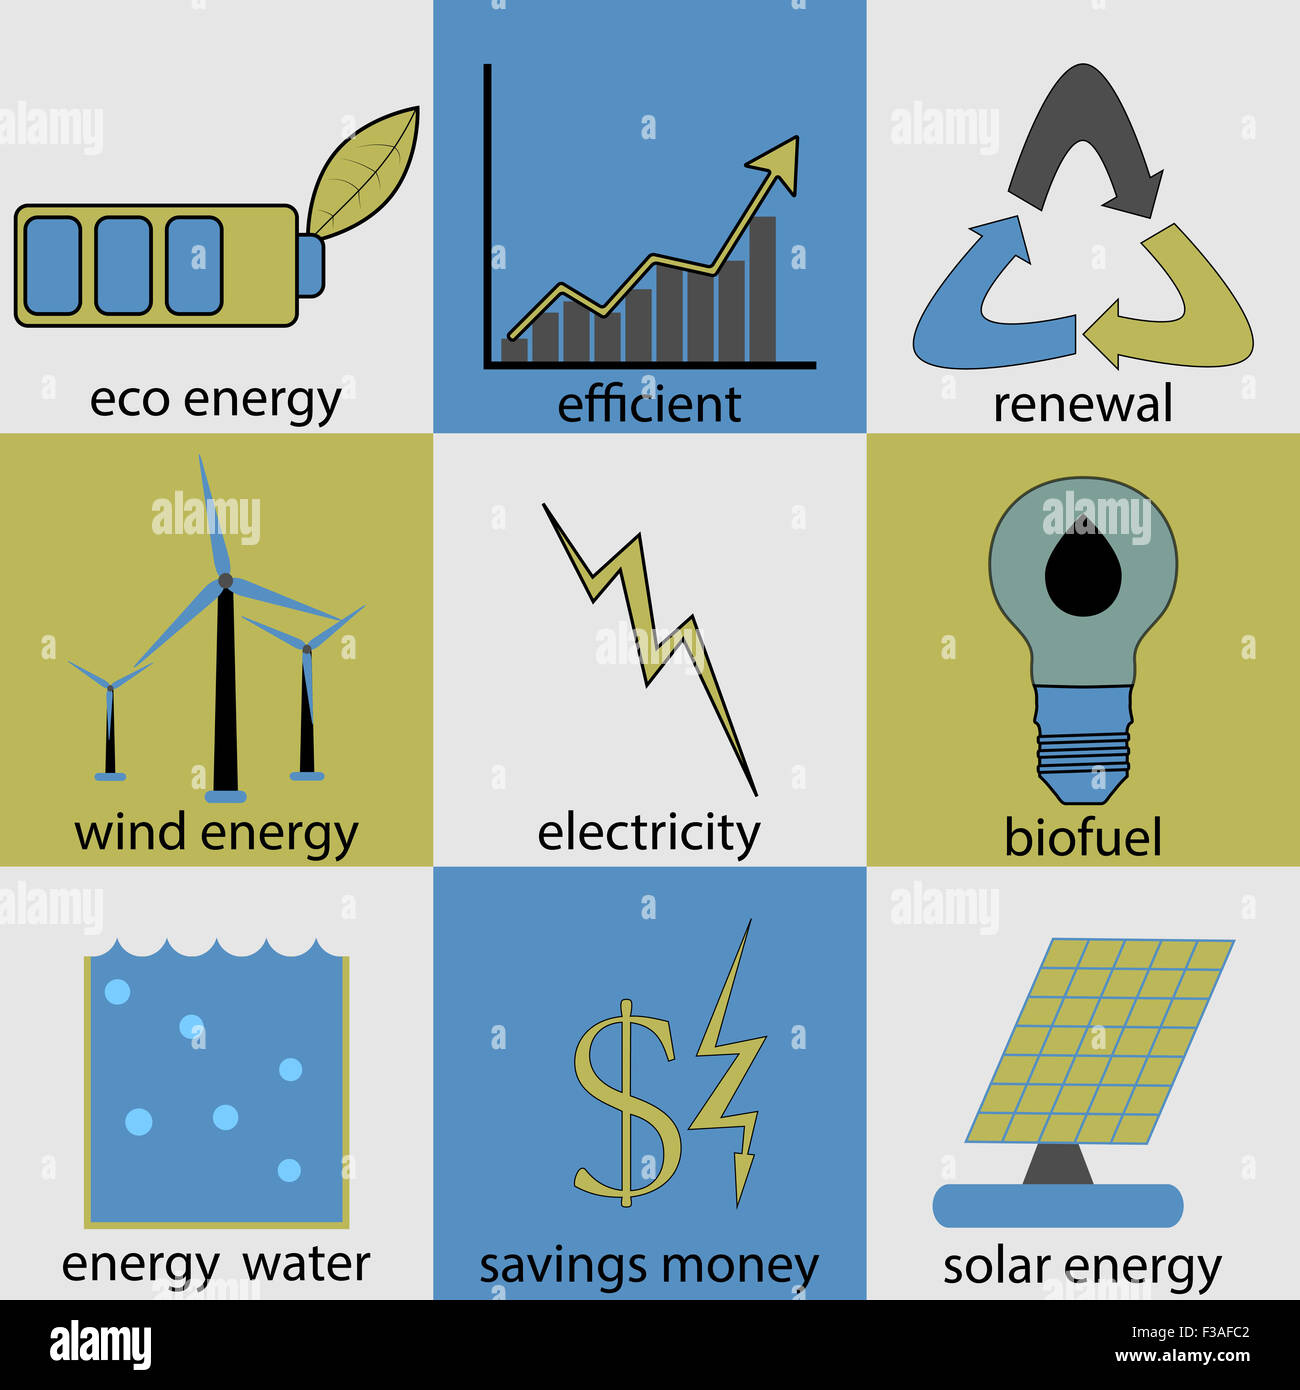 Eco energy icon set. Ecology renewal, logo biofuel, productivity and efficiency, money and electrical, button water and solar el Stock Photo